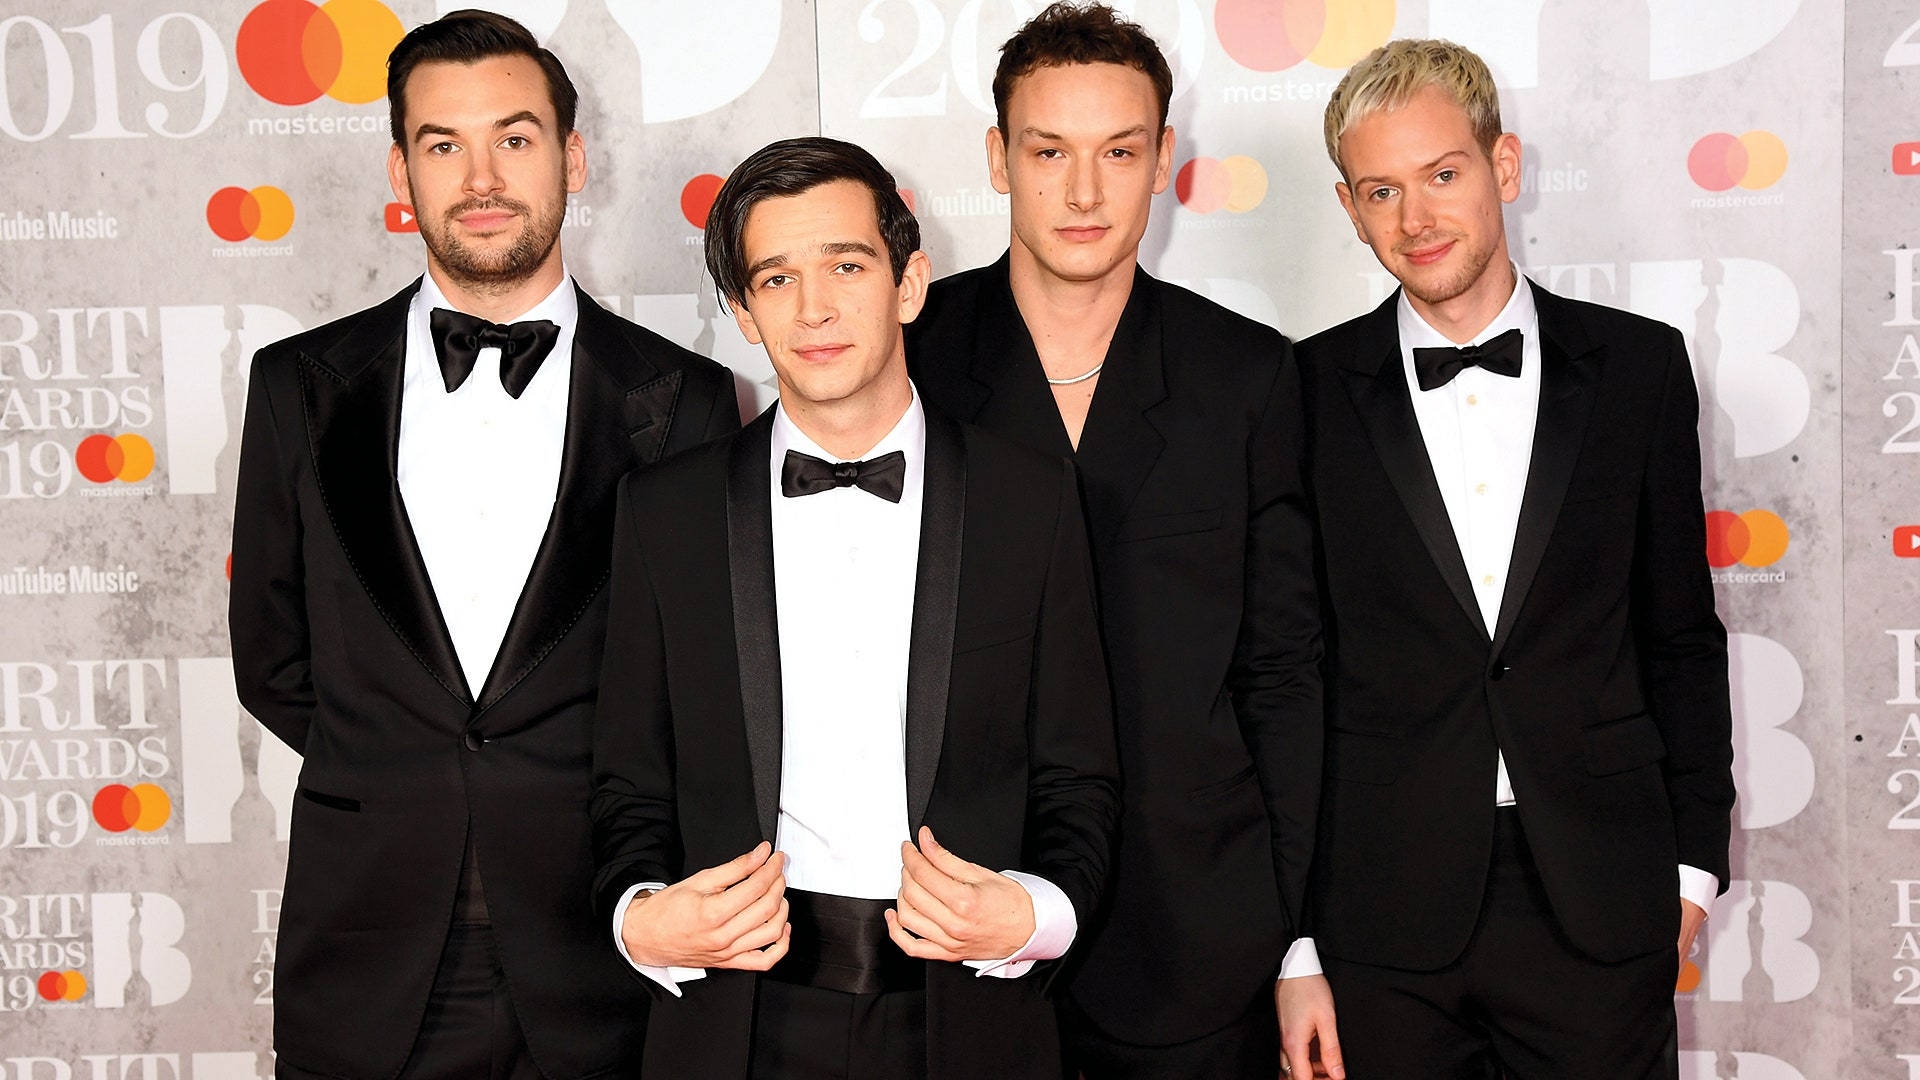 The 1975 Band In Tuxedo Suit Background